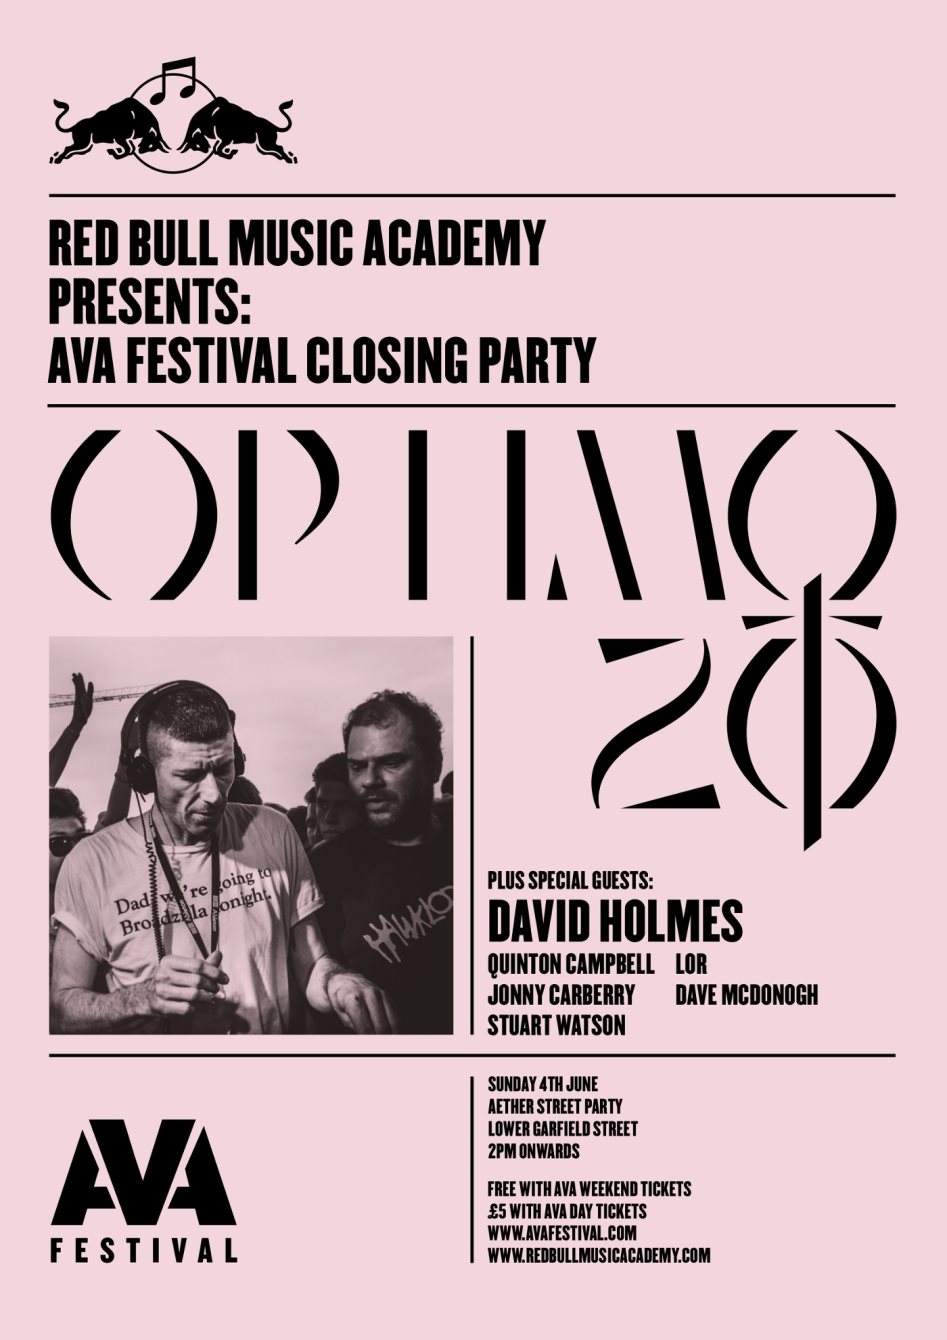 Red Bull Music Academy presents: AVA Festival Closing Party - Página frontal